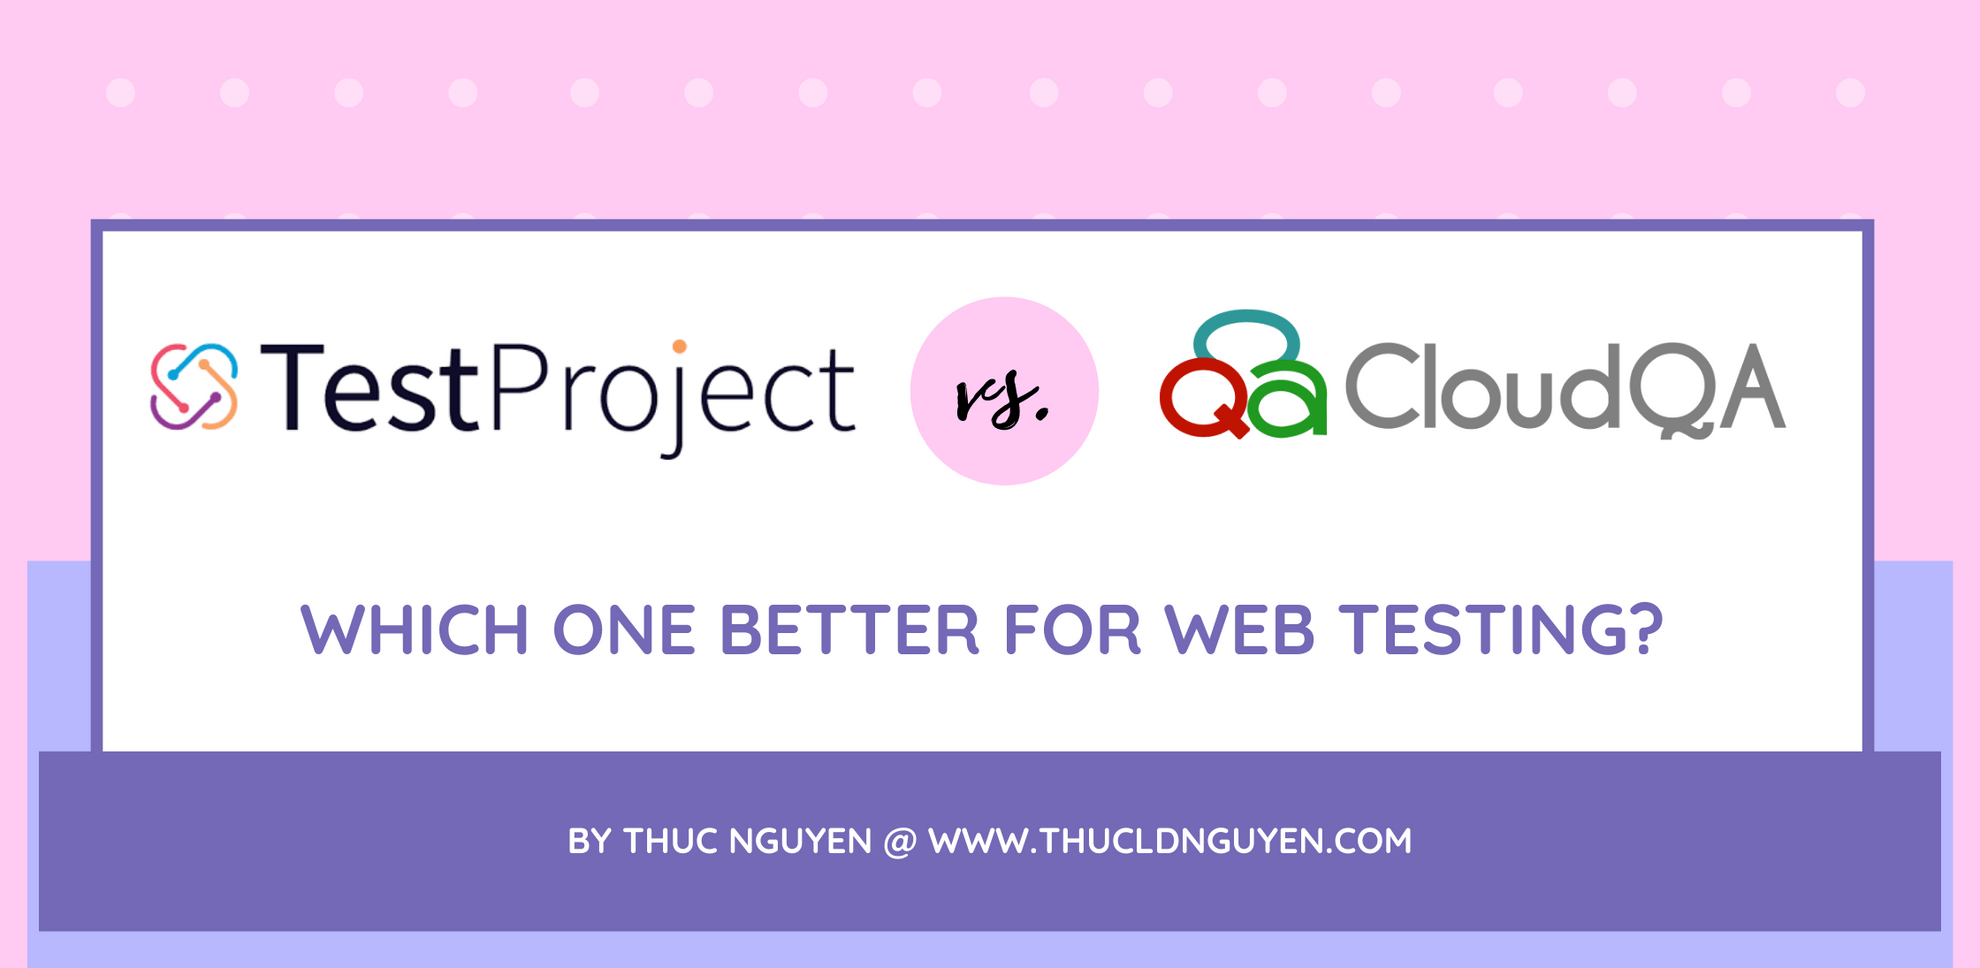 TestProject vs. CloudQA: Which One Better for Web Testing? - Featured image